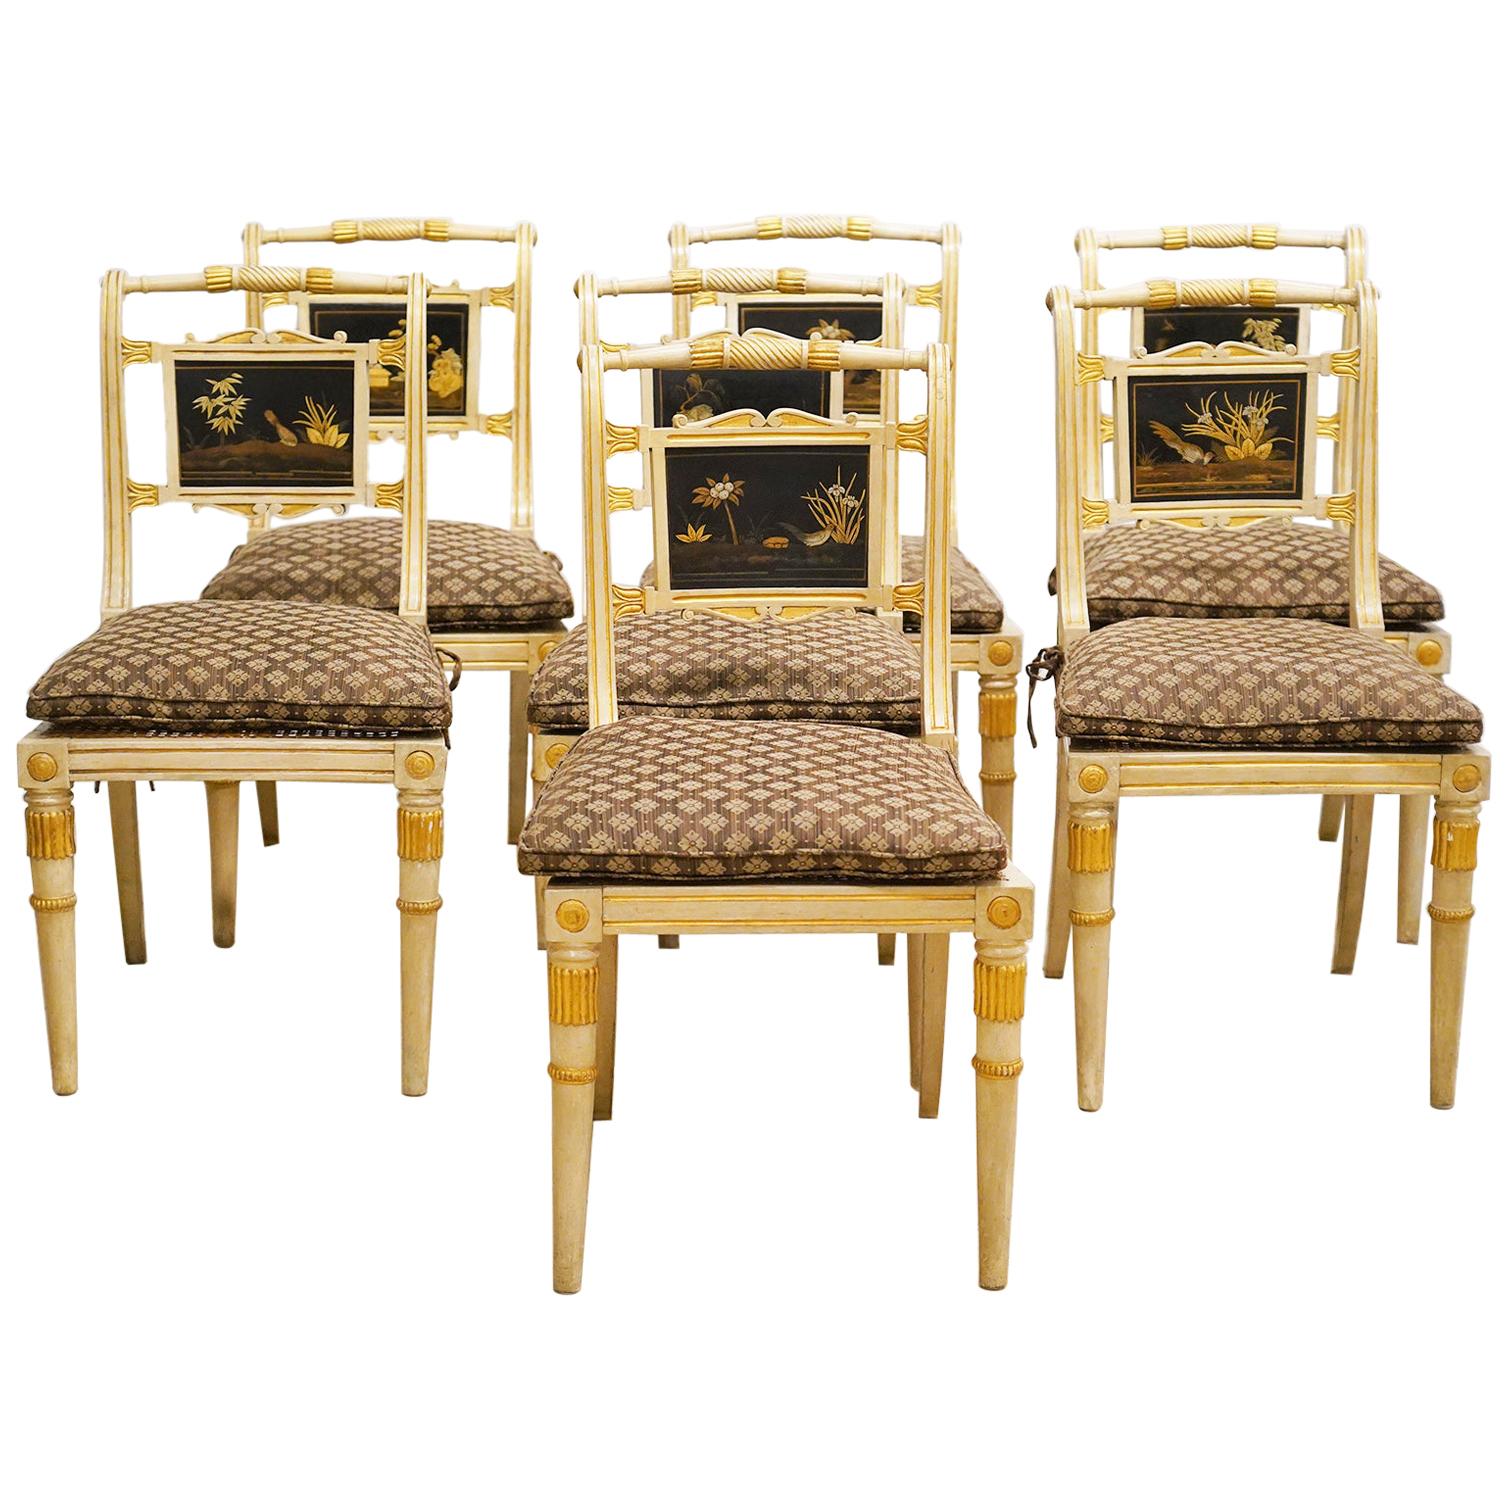 Seven English Regency Paint, Gilt and Lacquer Chairs by William Bertram, 19th C.